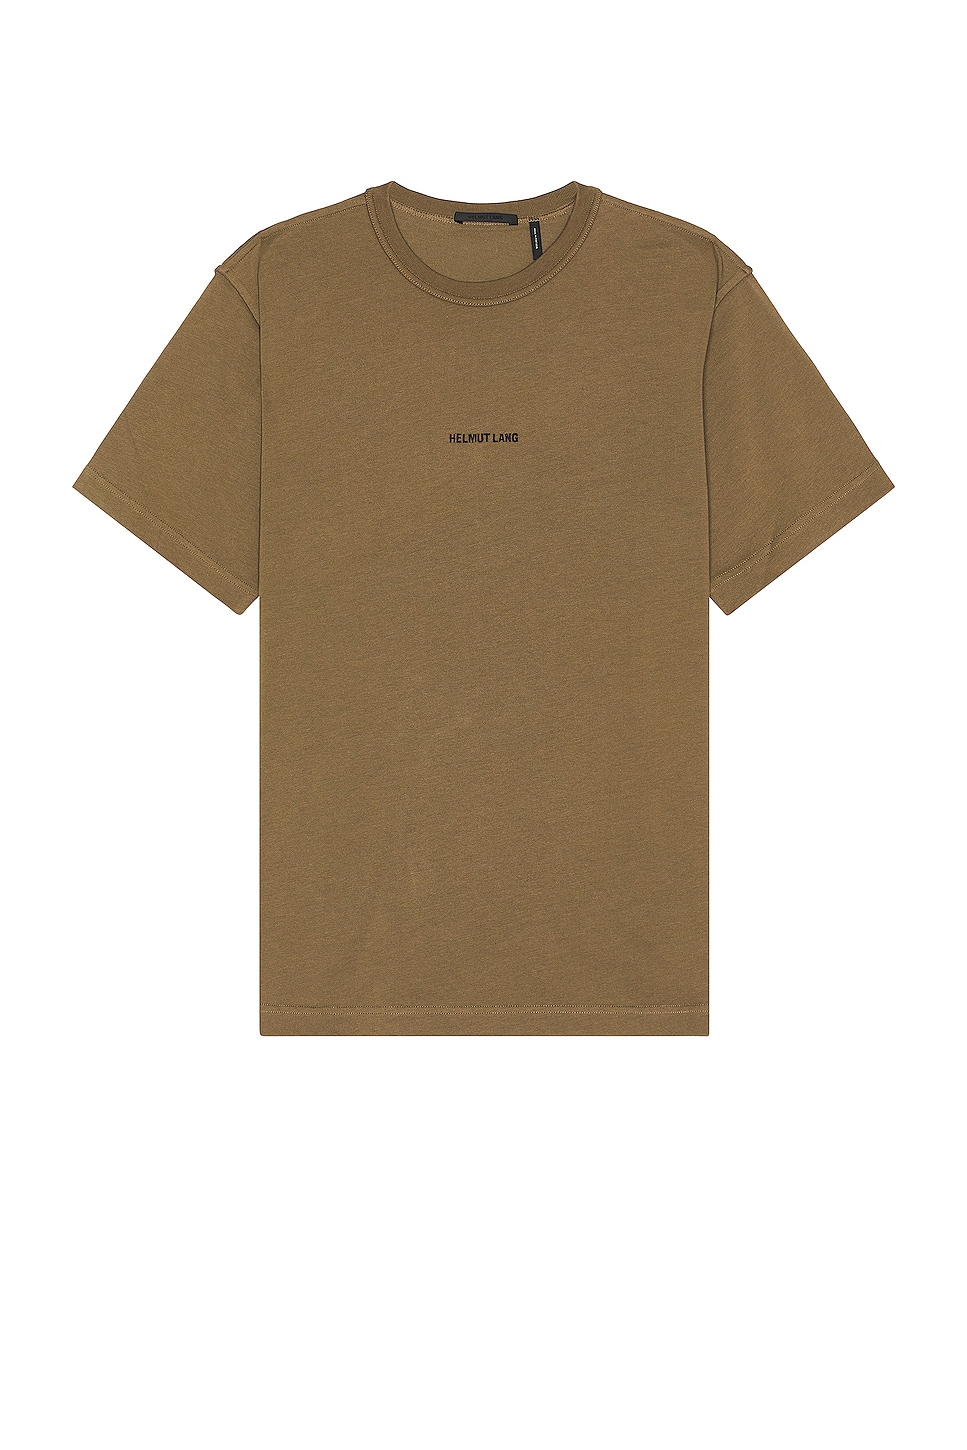 Image 1 of Helmut Lang Inside Out Tee in Olive